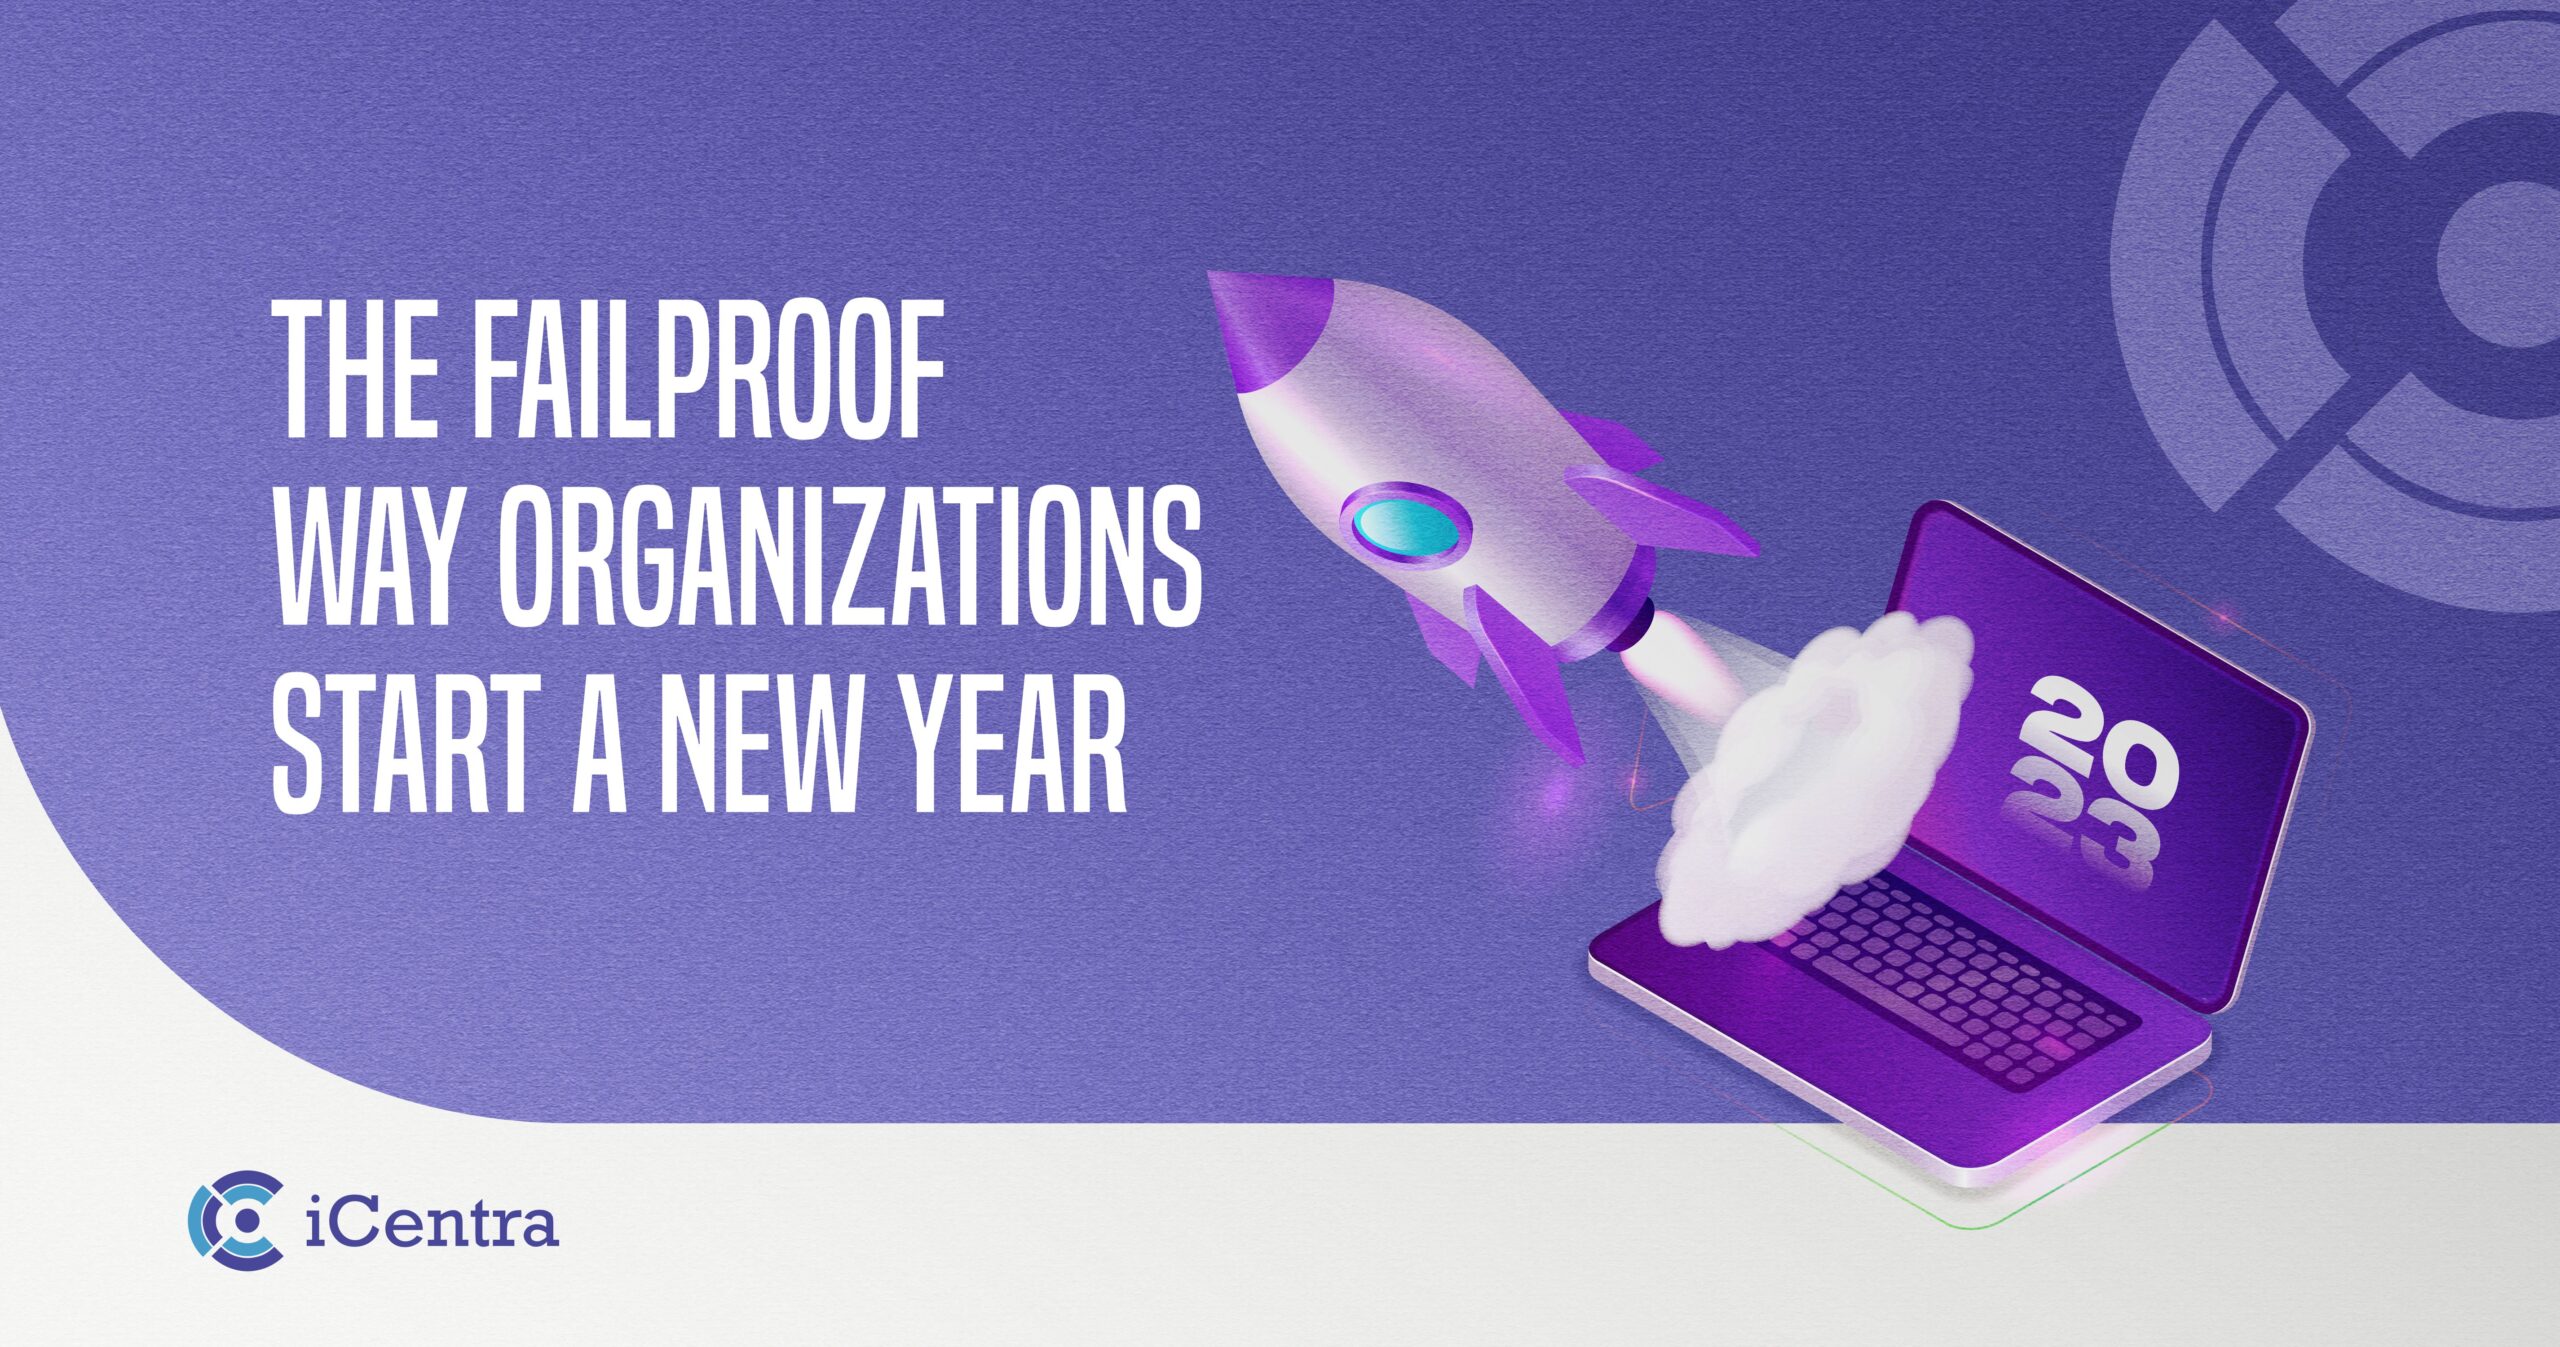 The Failproof Way Organizations Start a New Year